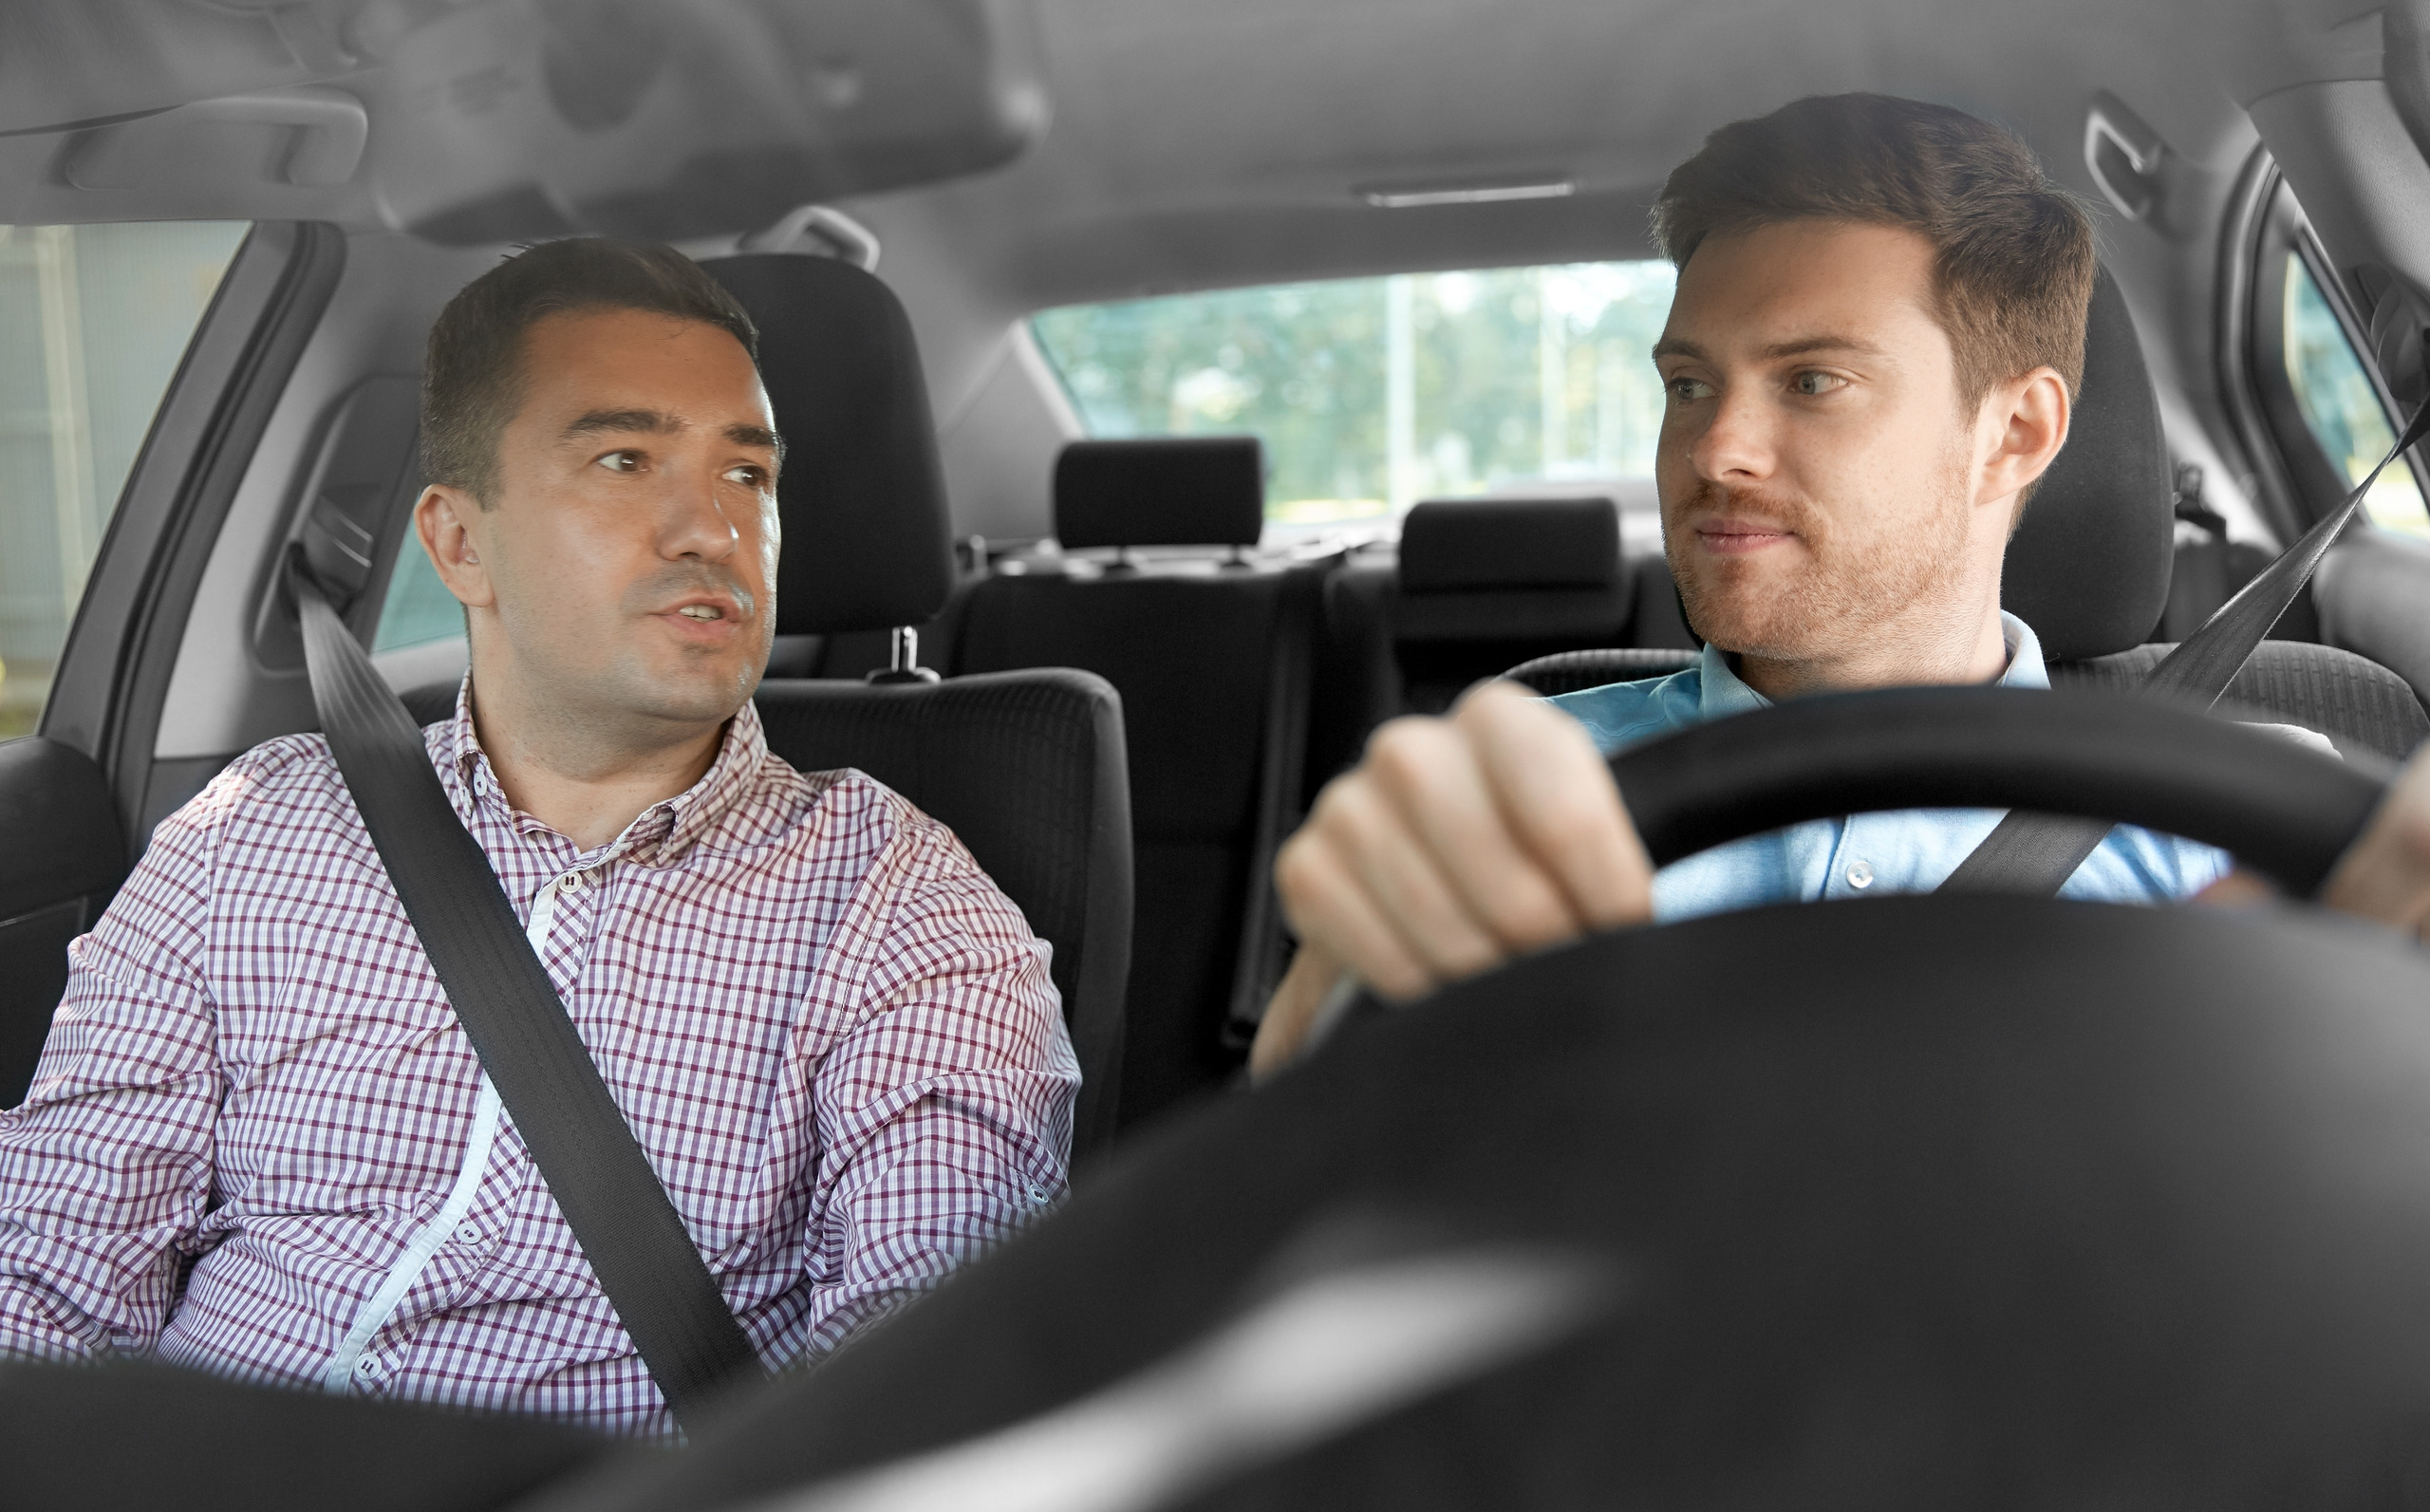 Steps to Take if Your Uber or Lyft Driver Causes an Accident in New Jersey